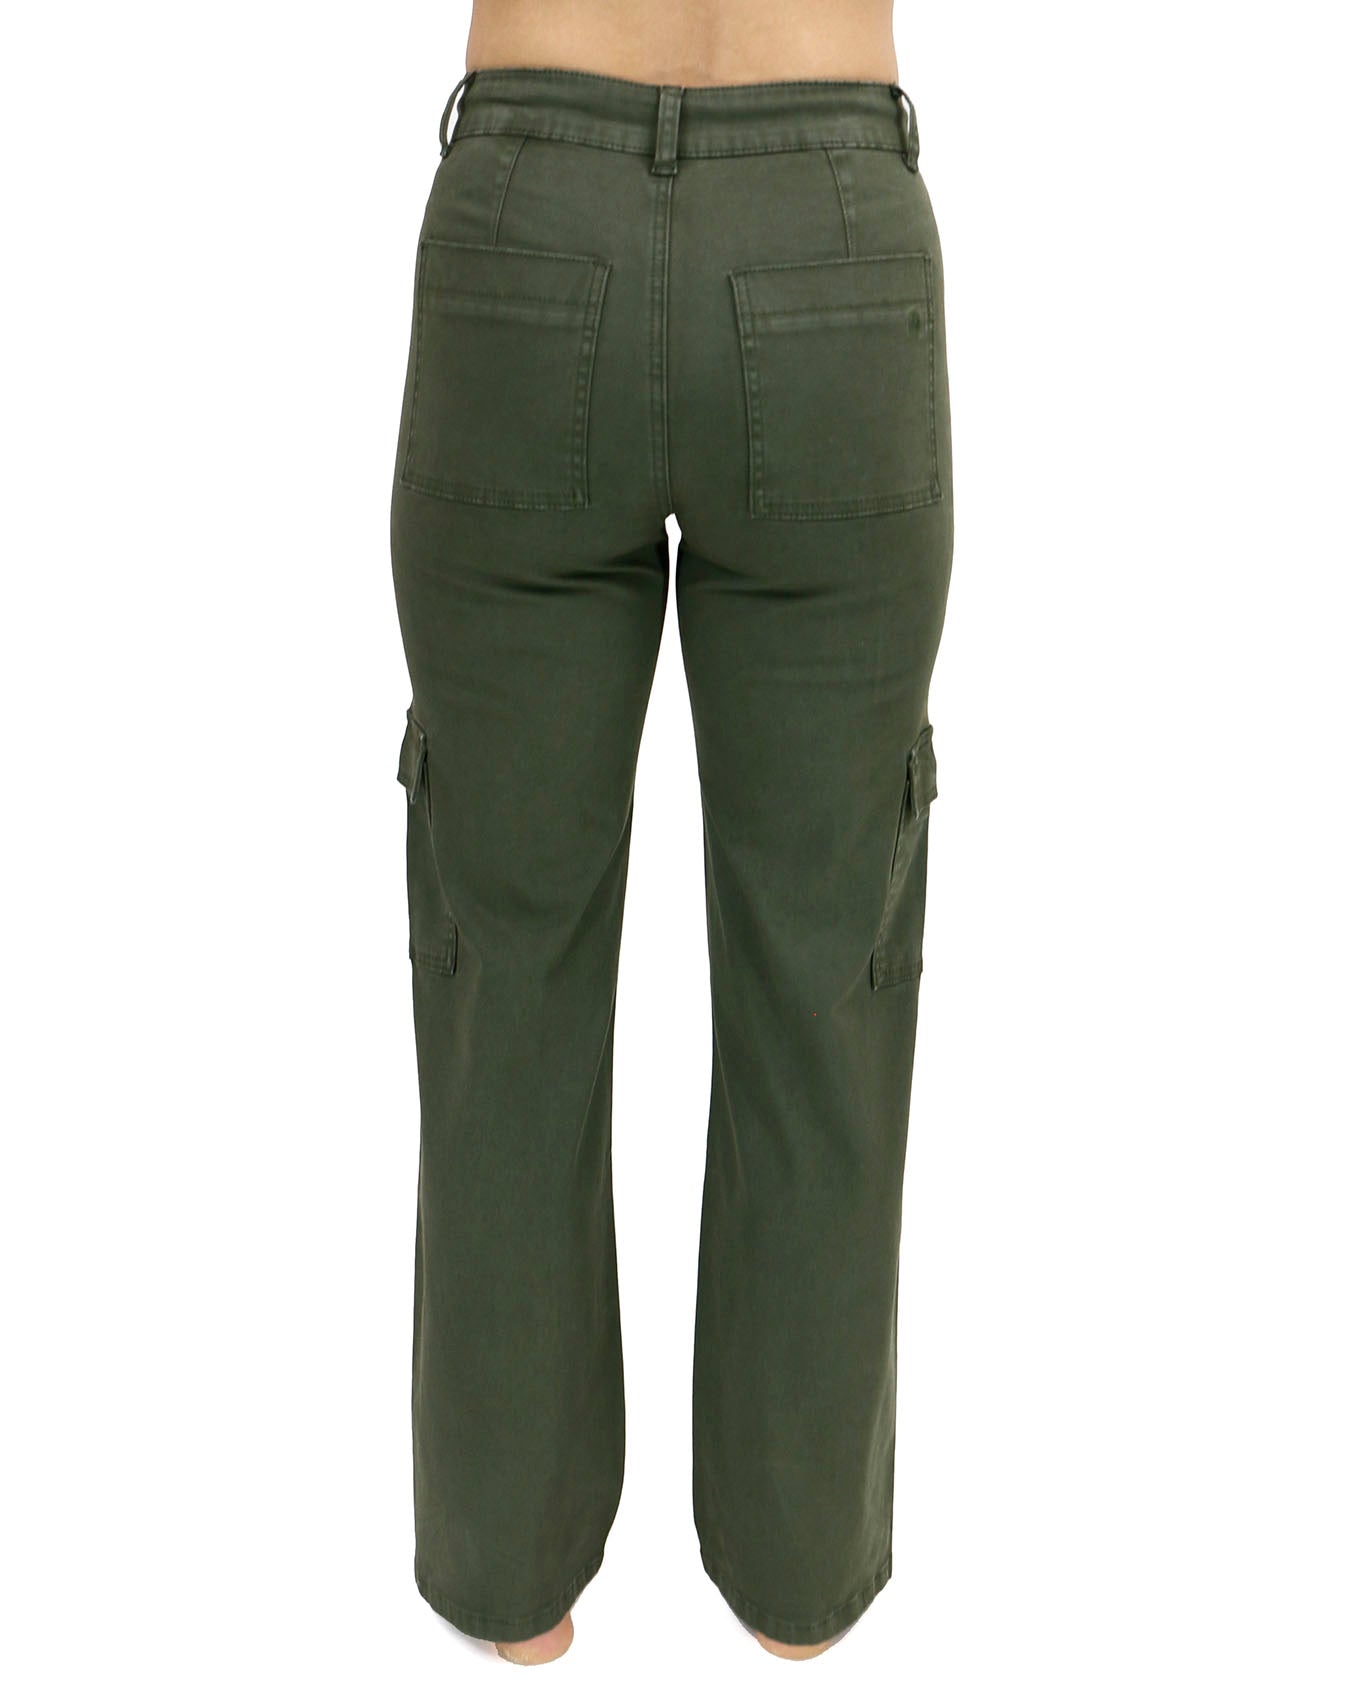 back view stock shot of green sueded twill cargo pants